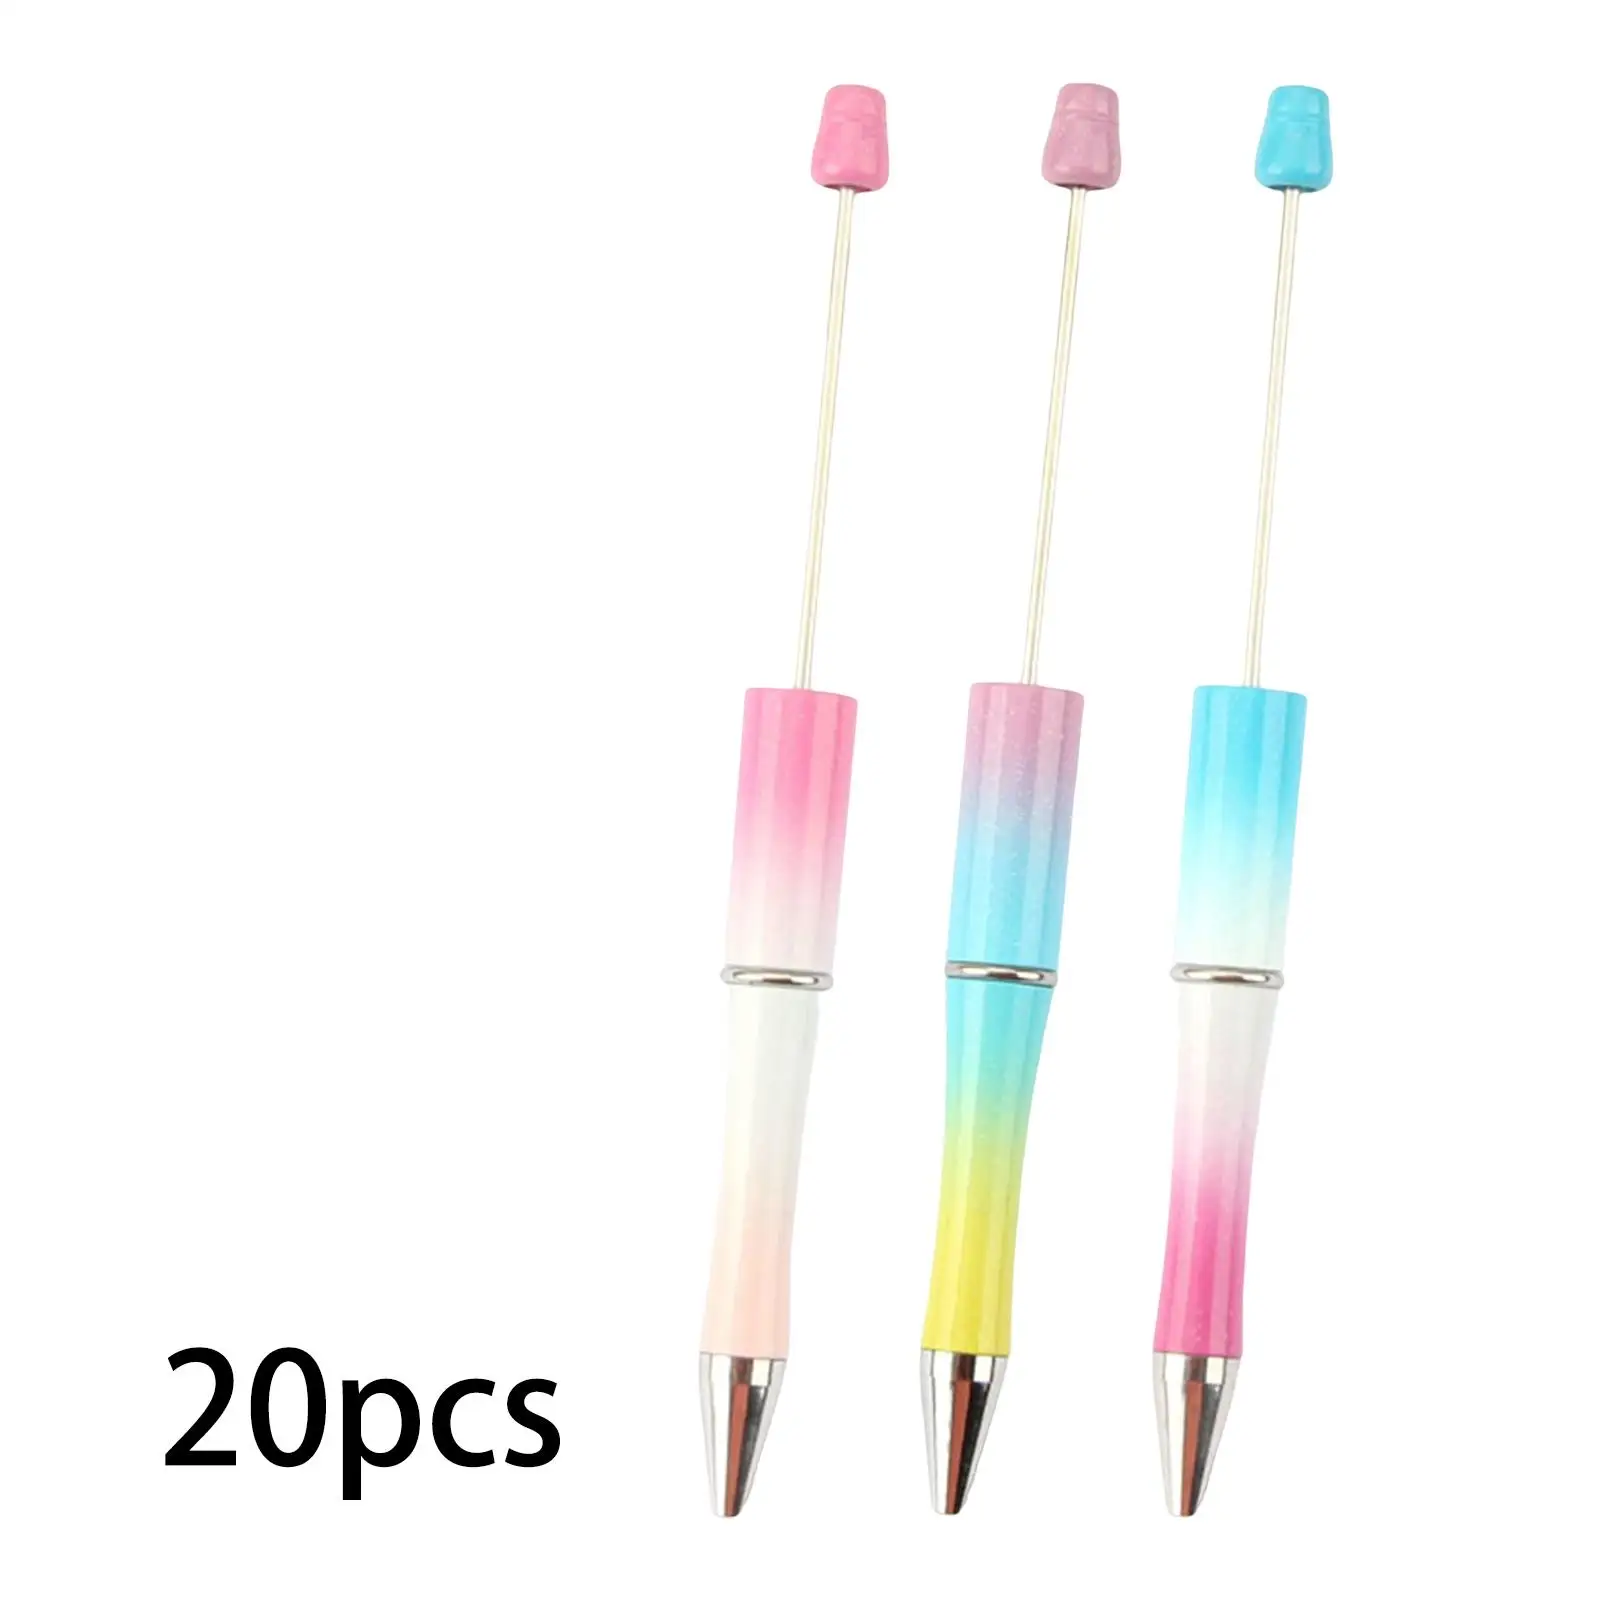 20x Beadable Pens Kit DIY Ball Pen Ballpoint Pen for School Drawing Students Gifts